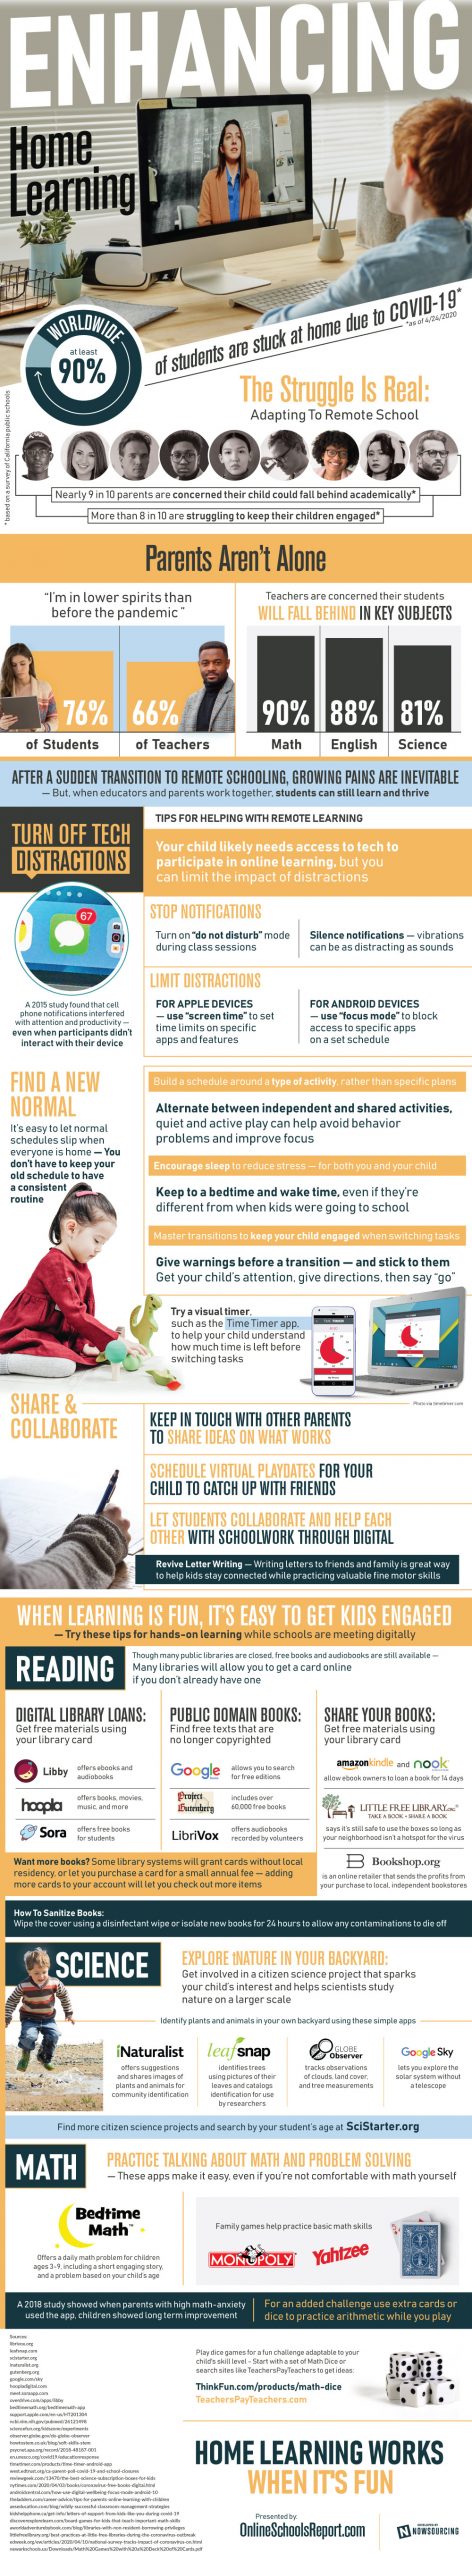 Enhancing home learning infographic